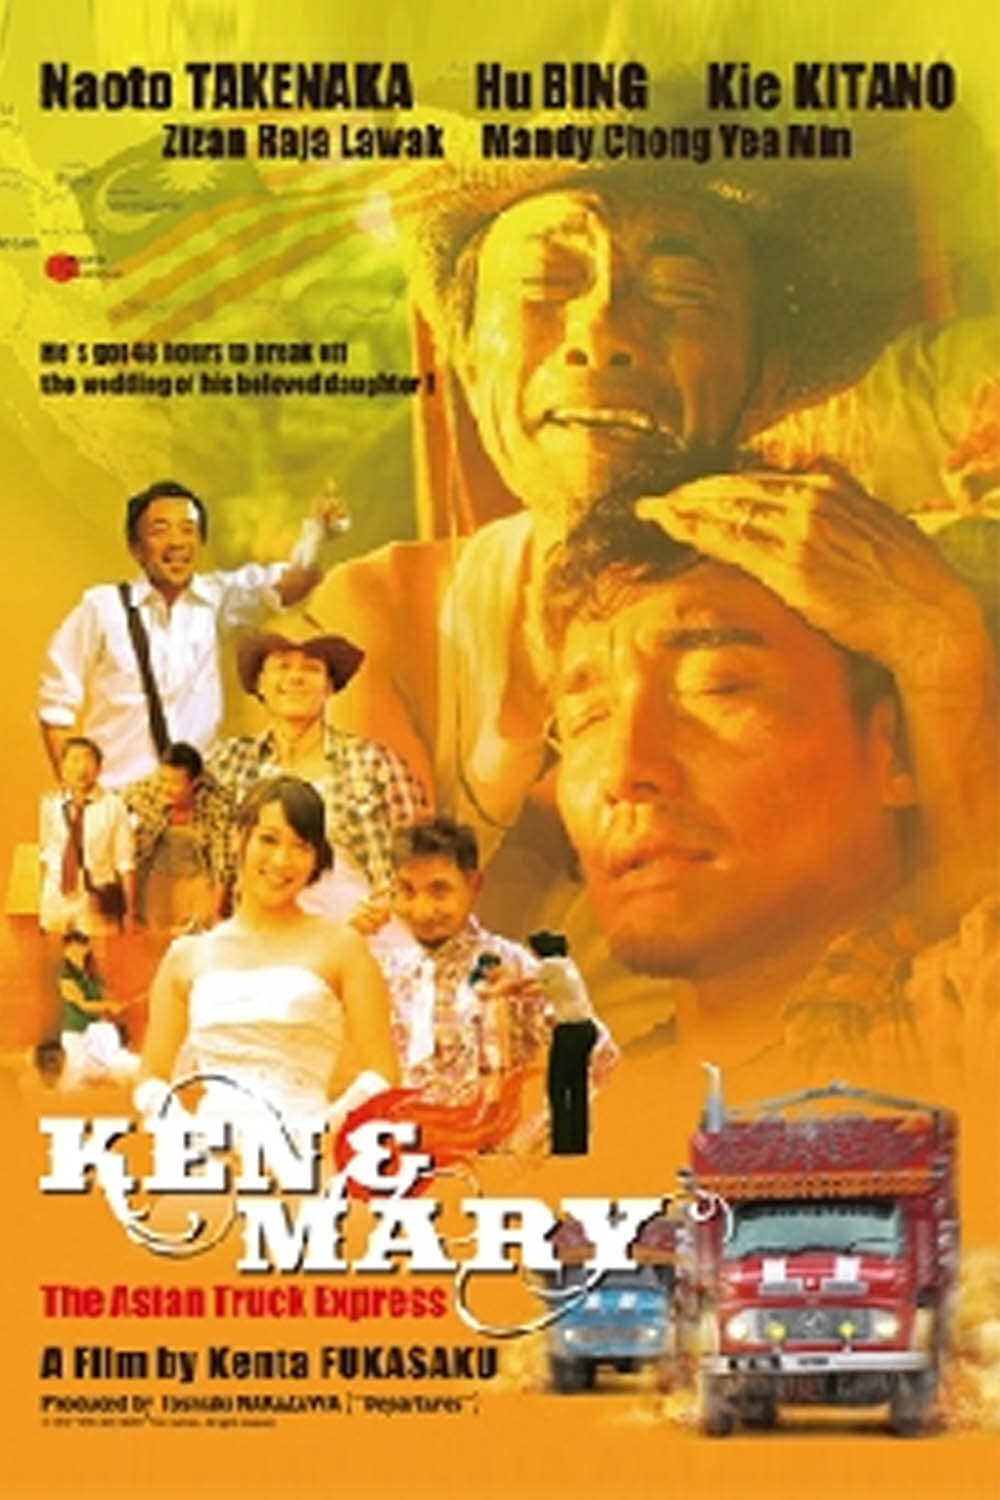 Ken and Mary: The Asian Truck Express